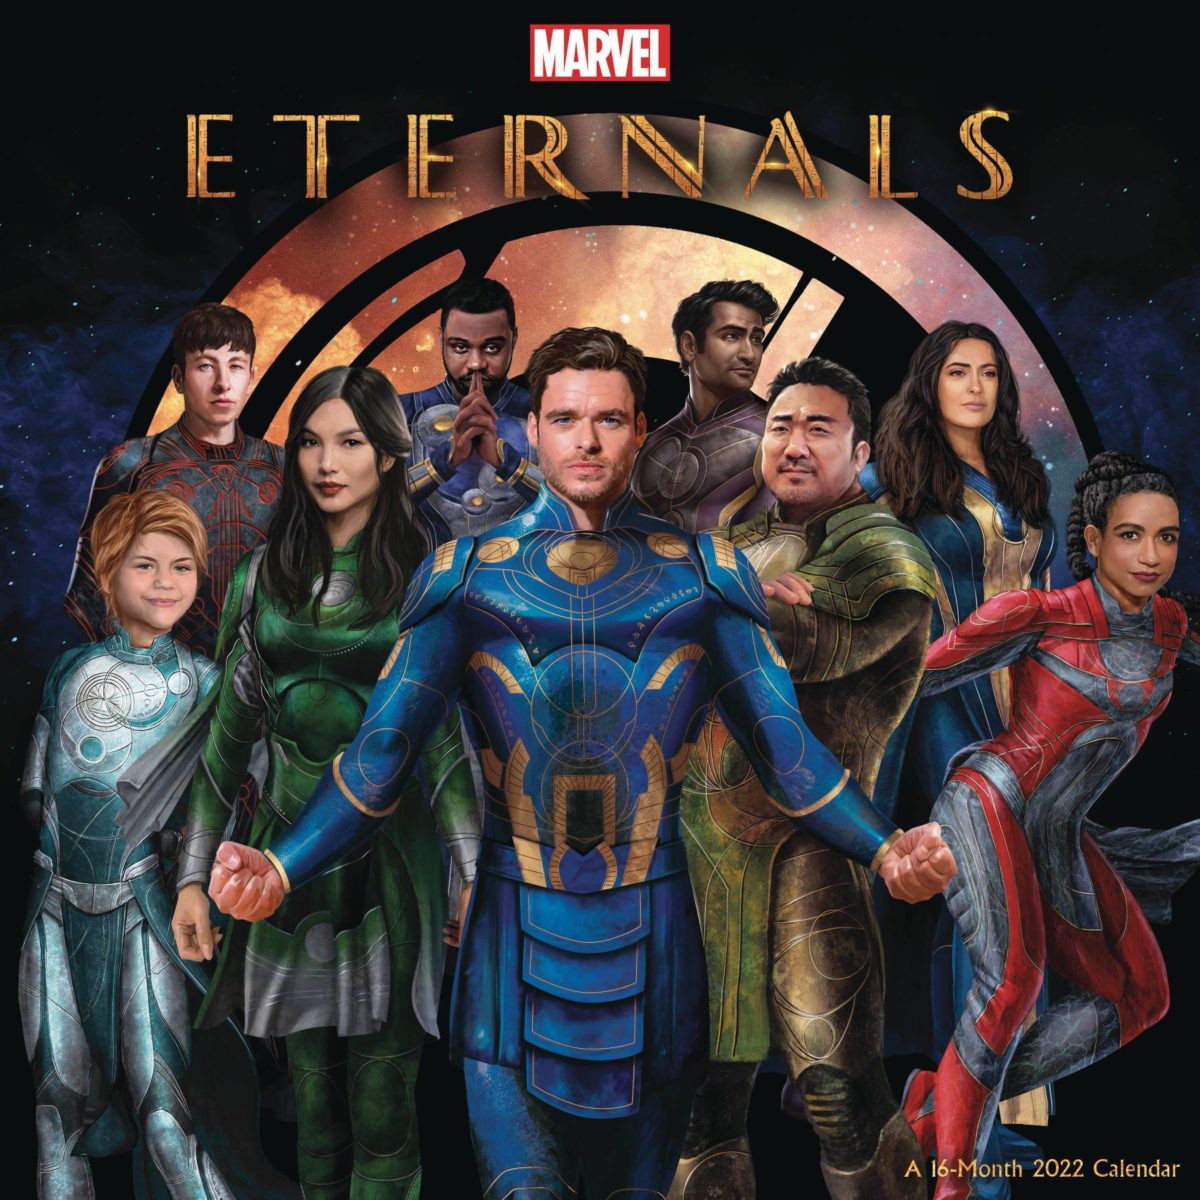 Let’s face it, The Eternals is probably going to be great